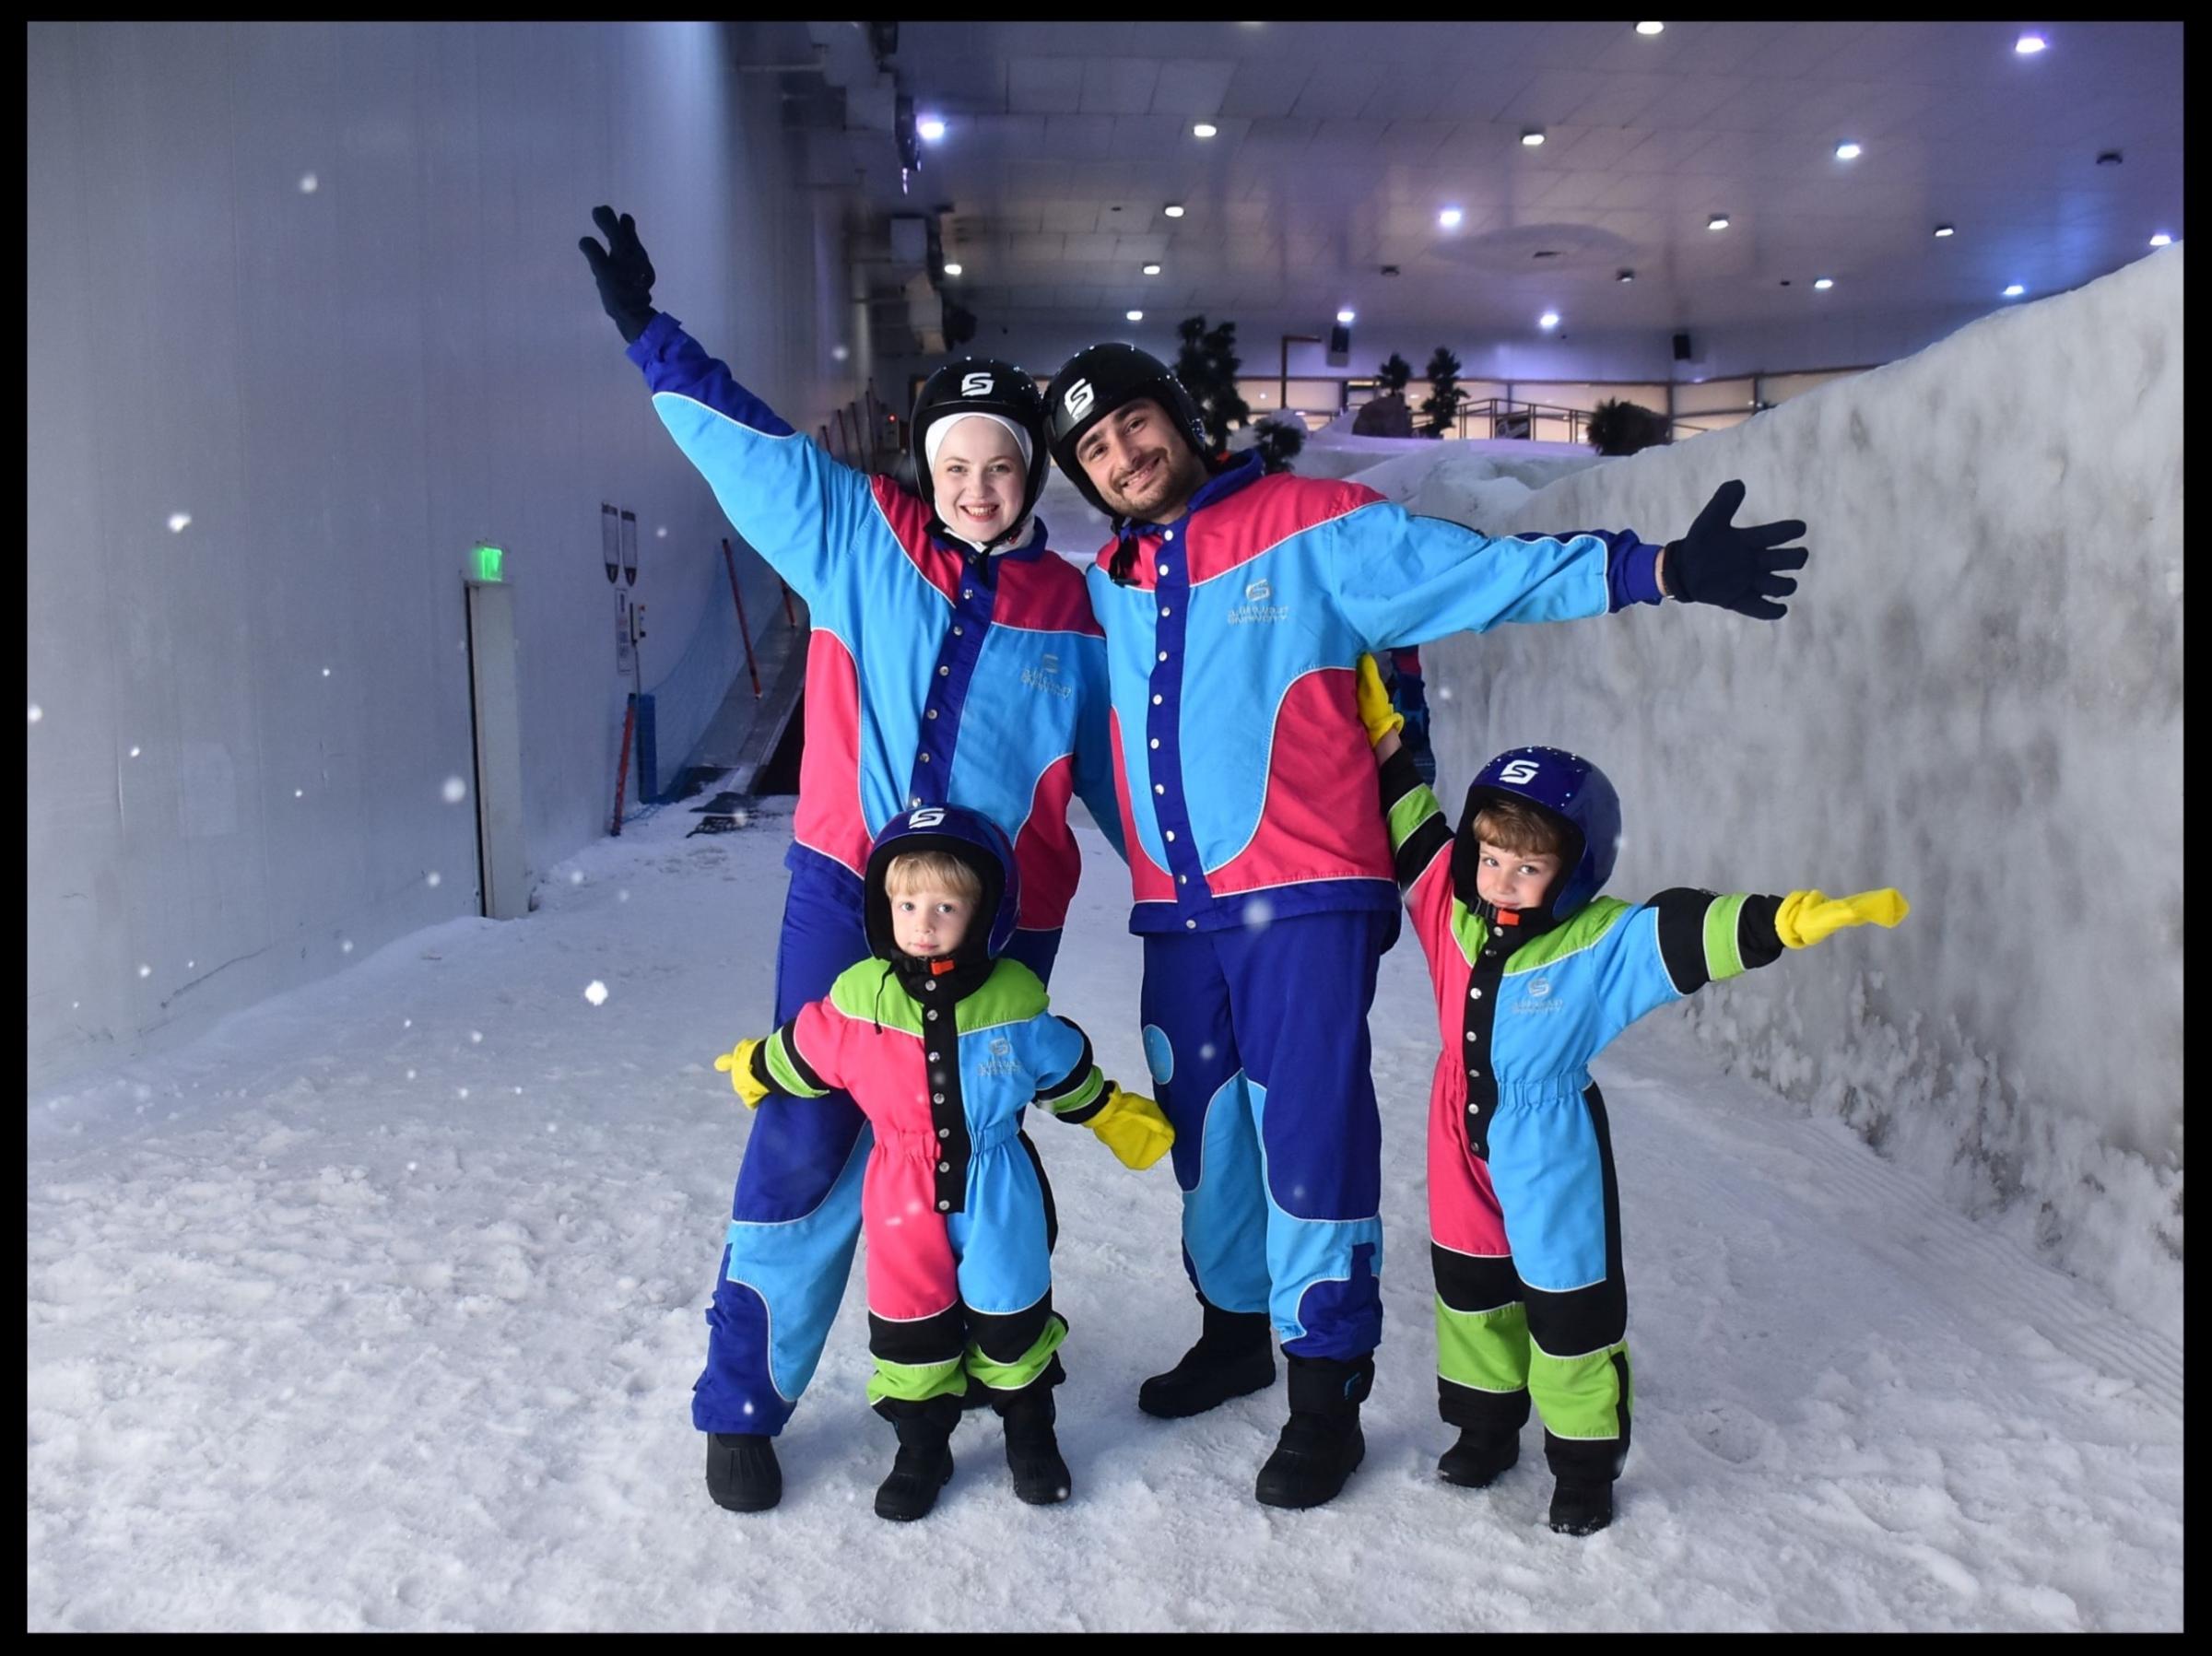 Murtaja’s brother Amer, his wife Eman, and their children Zaid and Omar at Ski Egypt in August, two months before the war began.